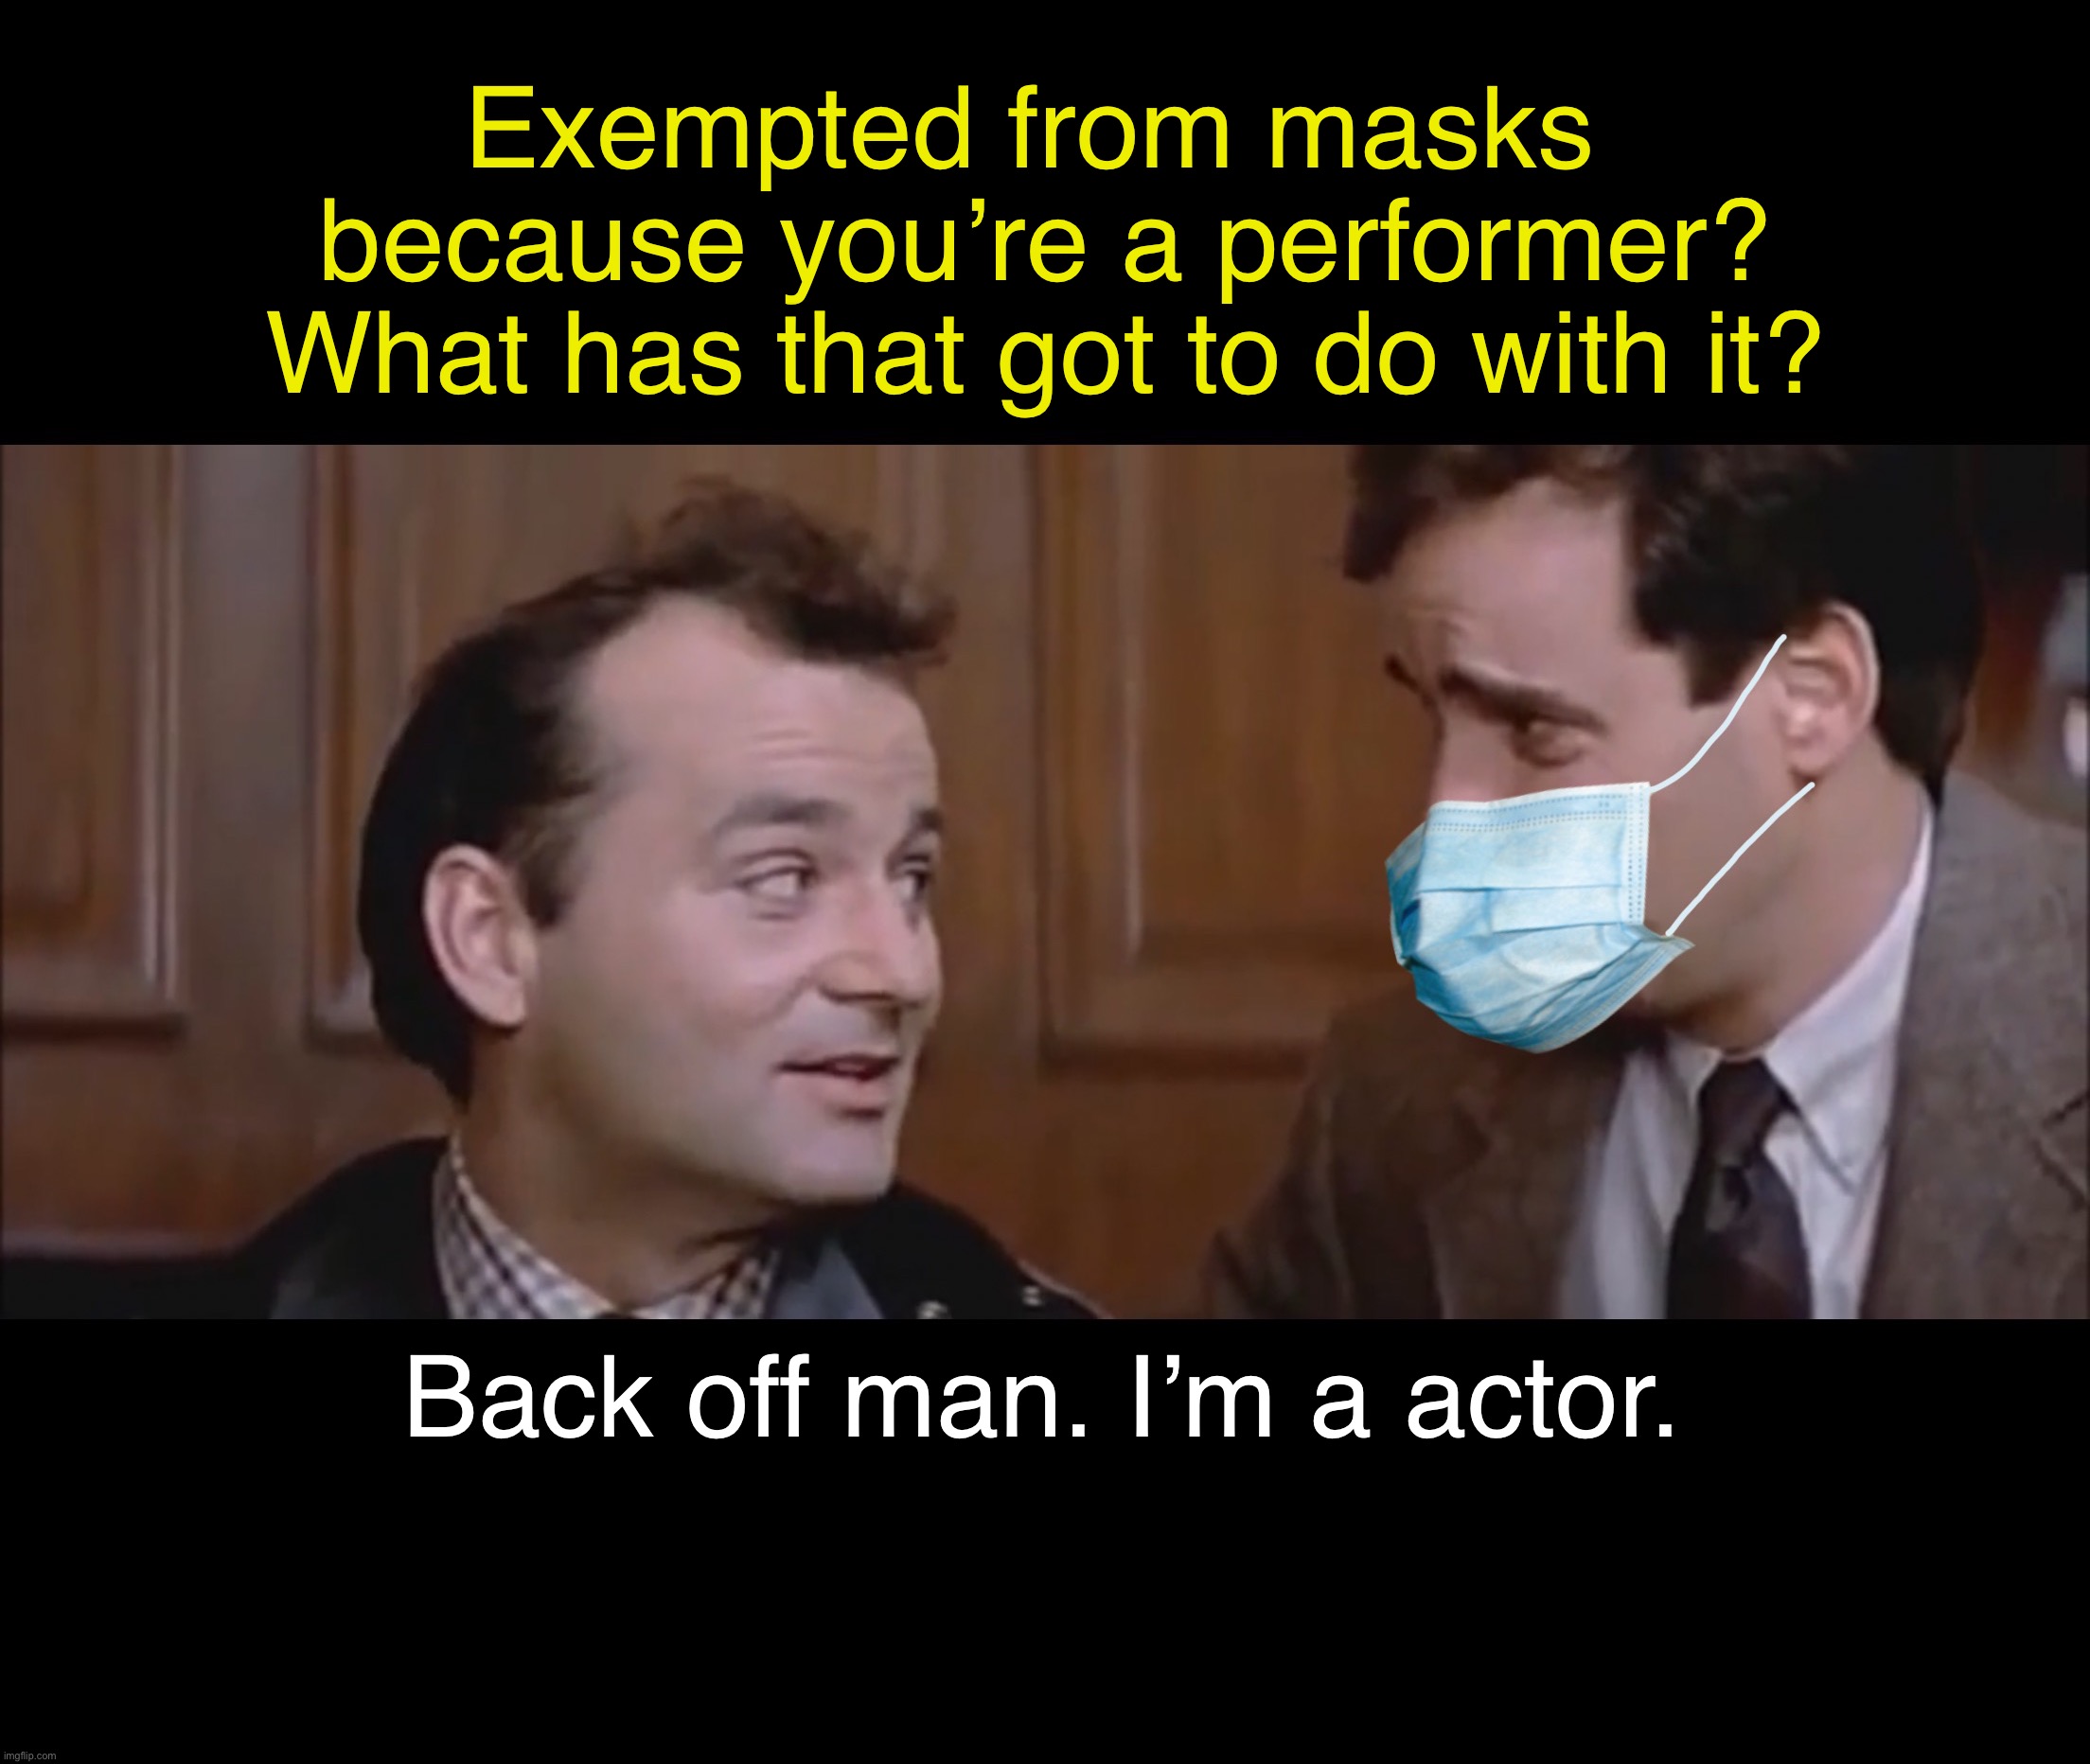 tRuSt ThE sCiEnCe! | Exempted from masks 
because you’re a performer?
What has that got to do with it? Back off man. I’m a actor. | image tagged in masks,face mask,china virus,covid-19,hypocrisy,celebrities | made w/ Imgflip meme maker